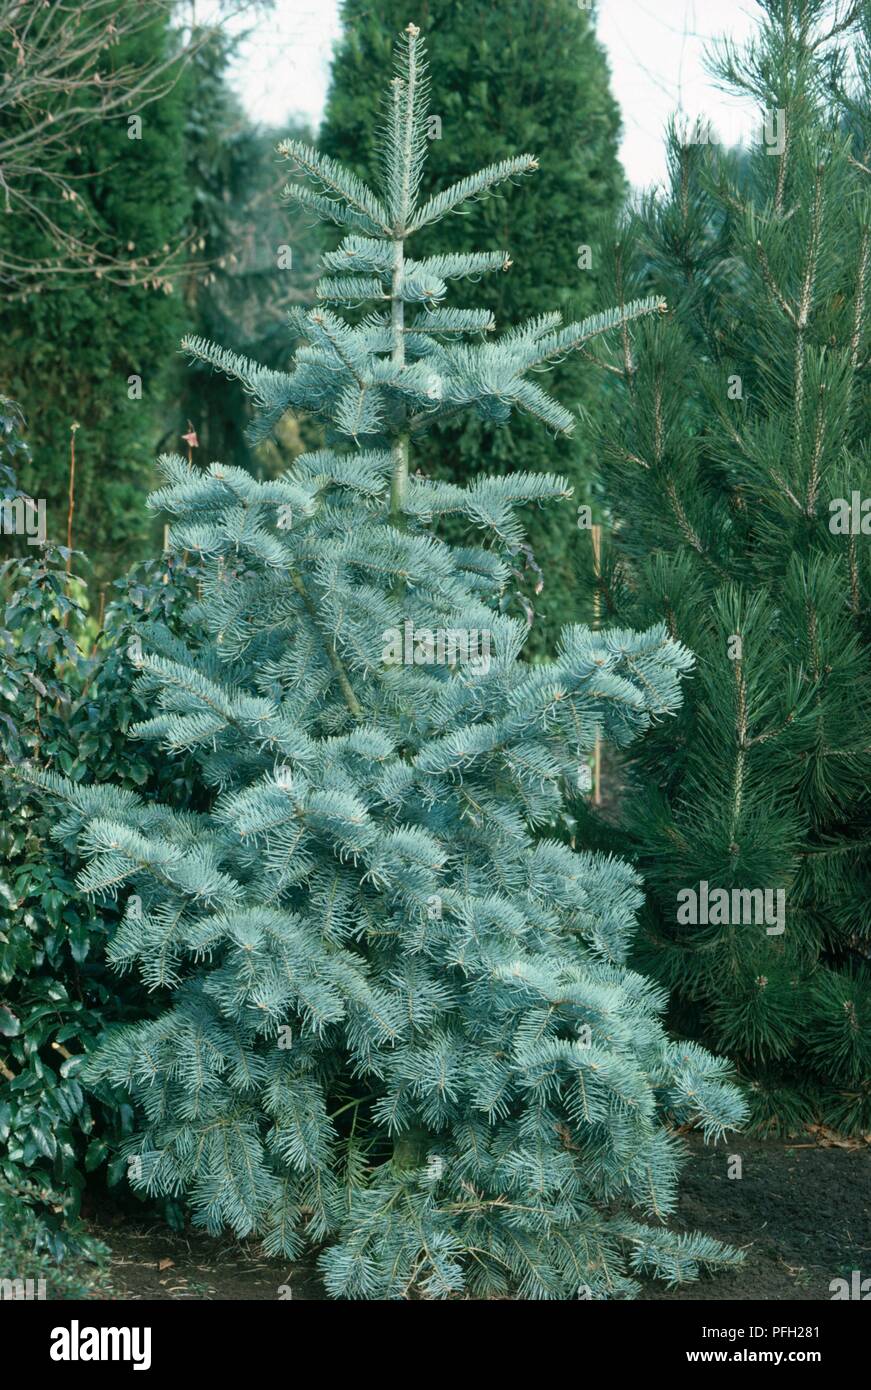 Abies concolor (White Fir), columnar tree with green needle leaves Stock Photo